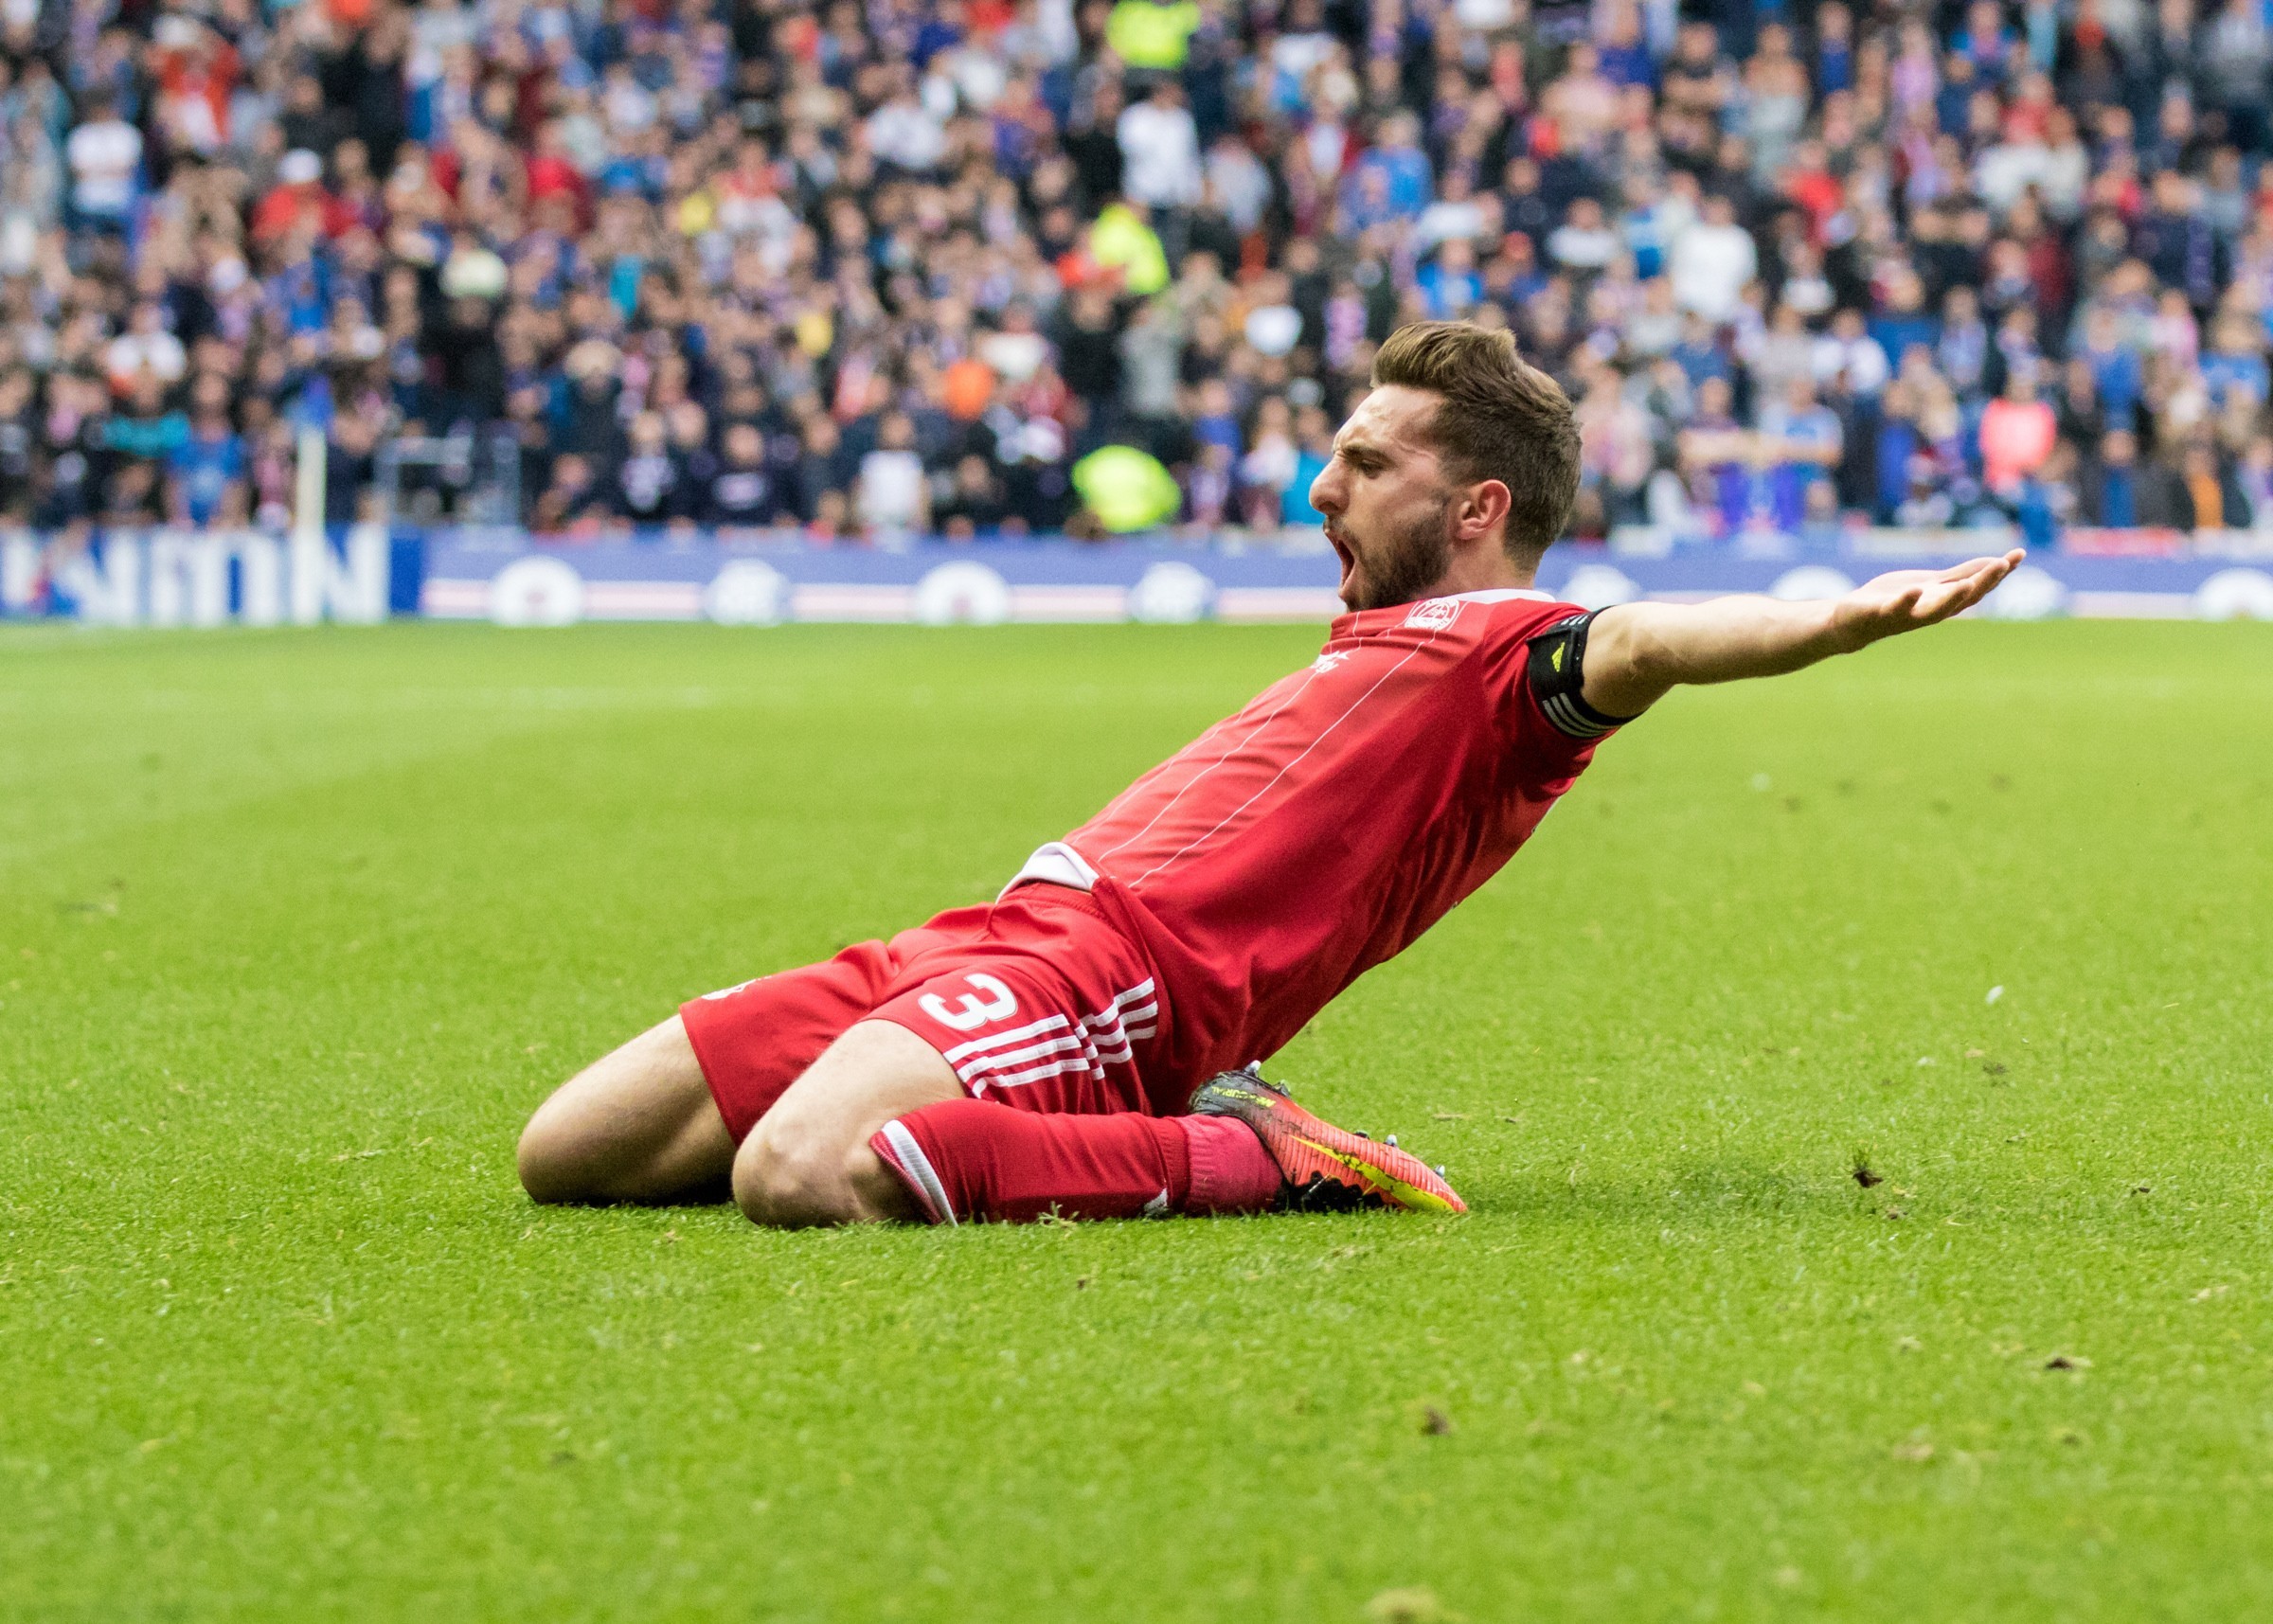 Graeme Shinnie will lead Aberdeen into today's Betfred Cup semi-final against Rangers.